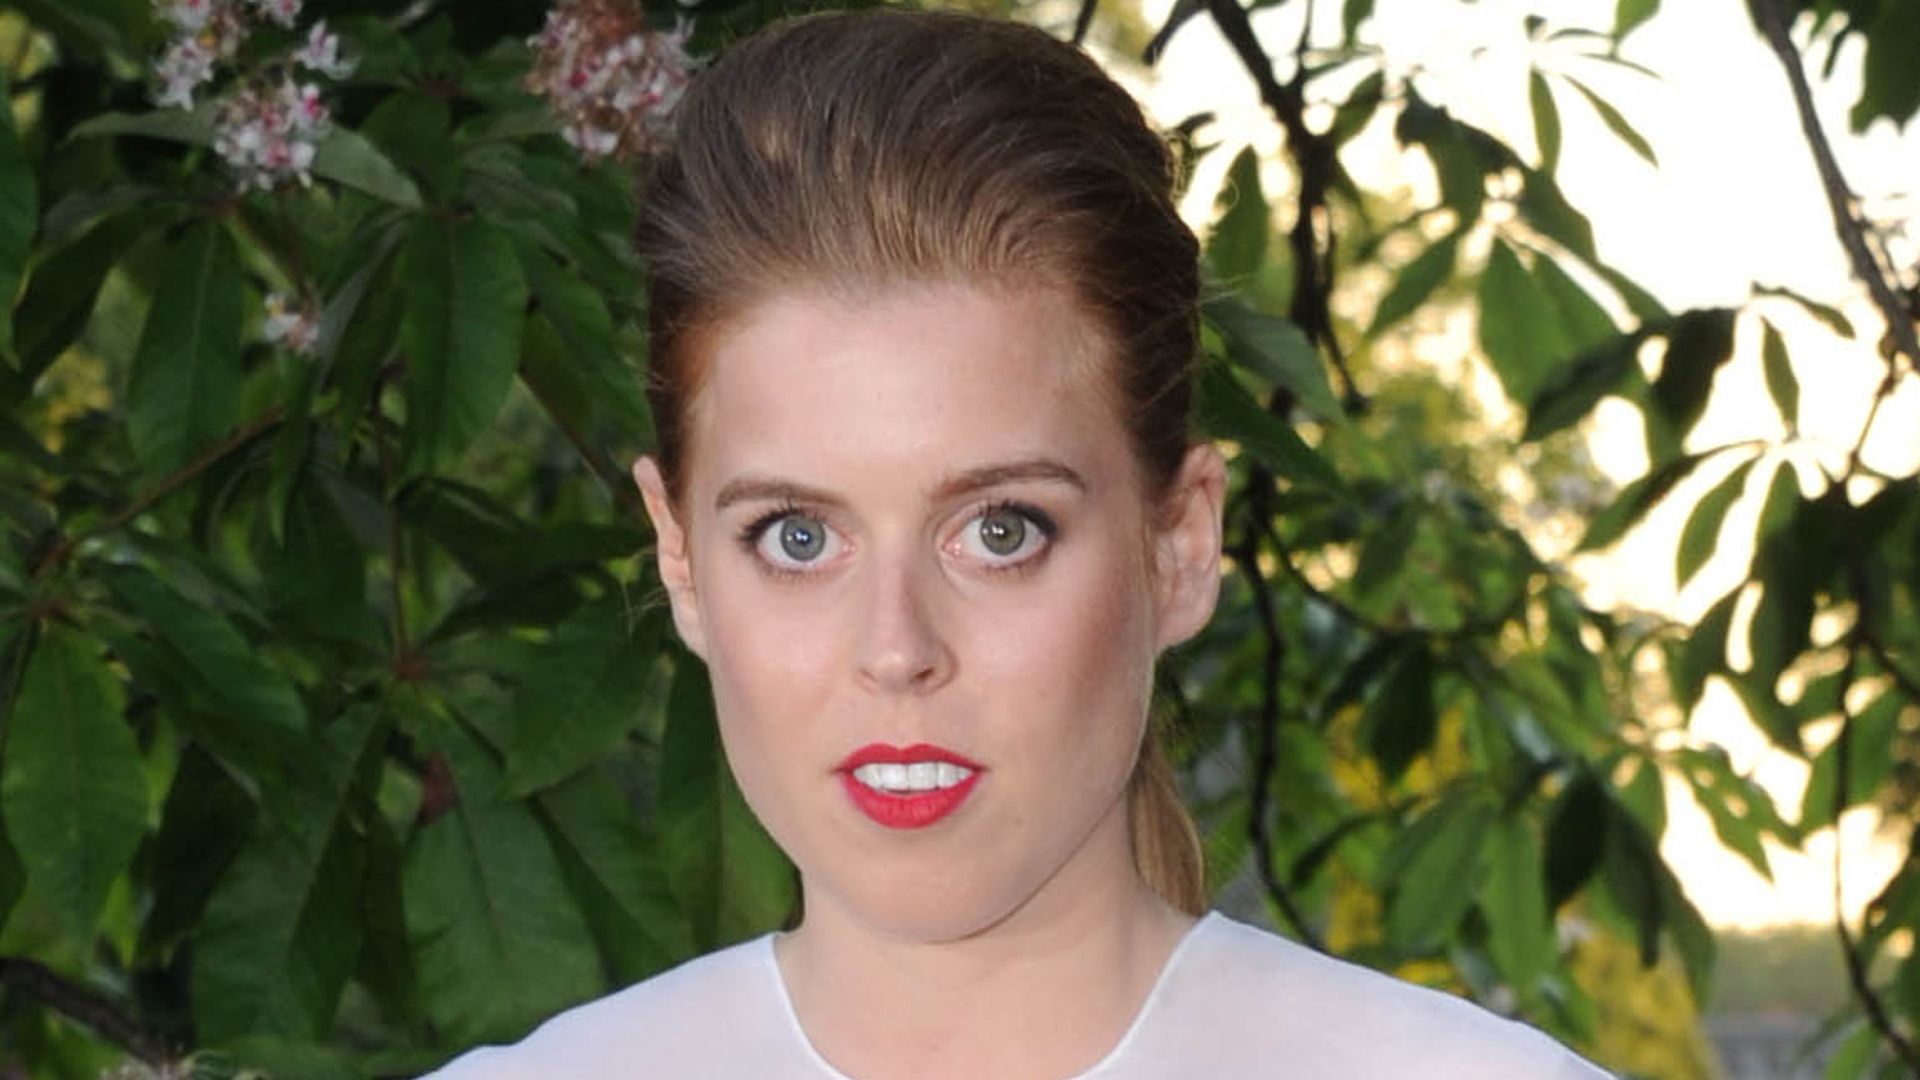 Princess Beatrice attends the annual Serpentine Galley Summer Party at The Serpentine Gallery in 2014